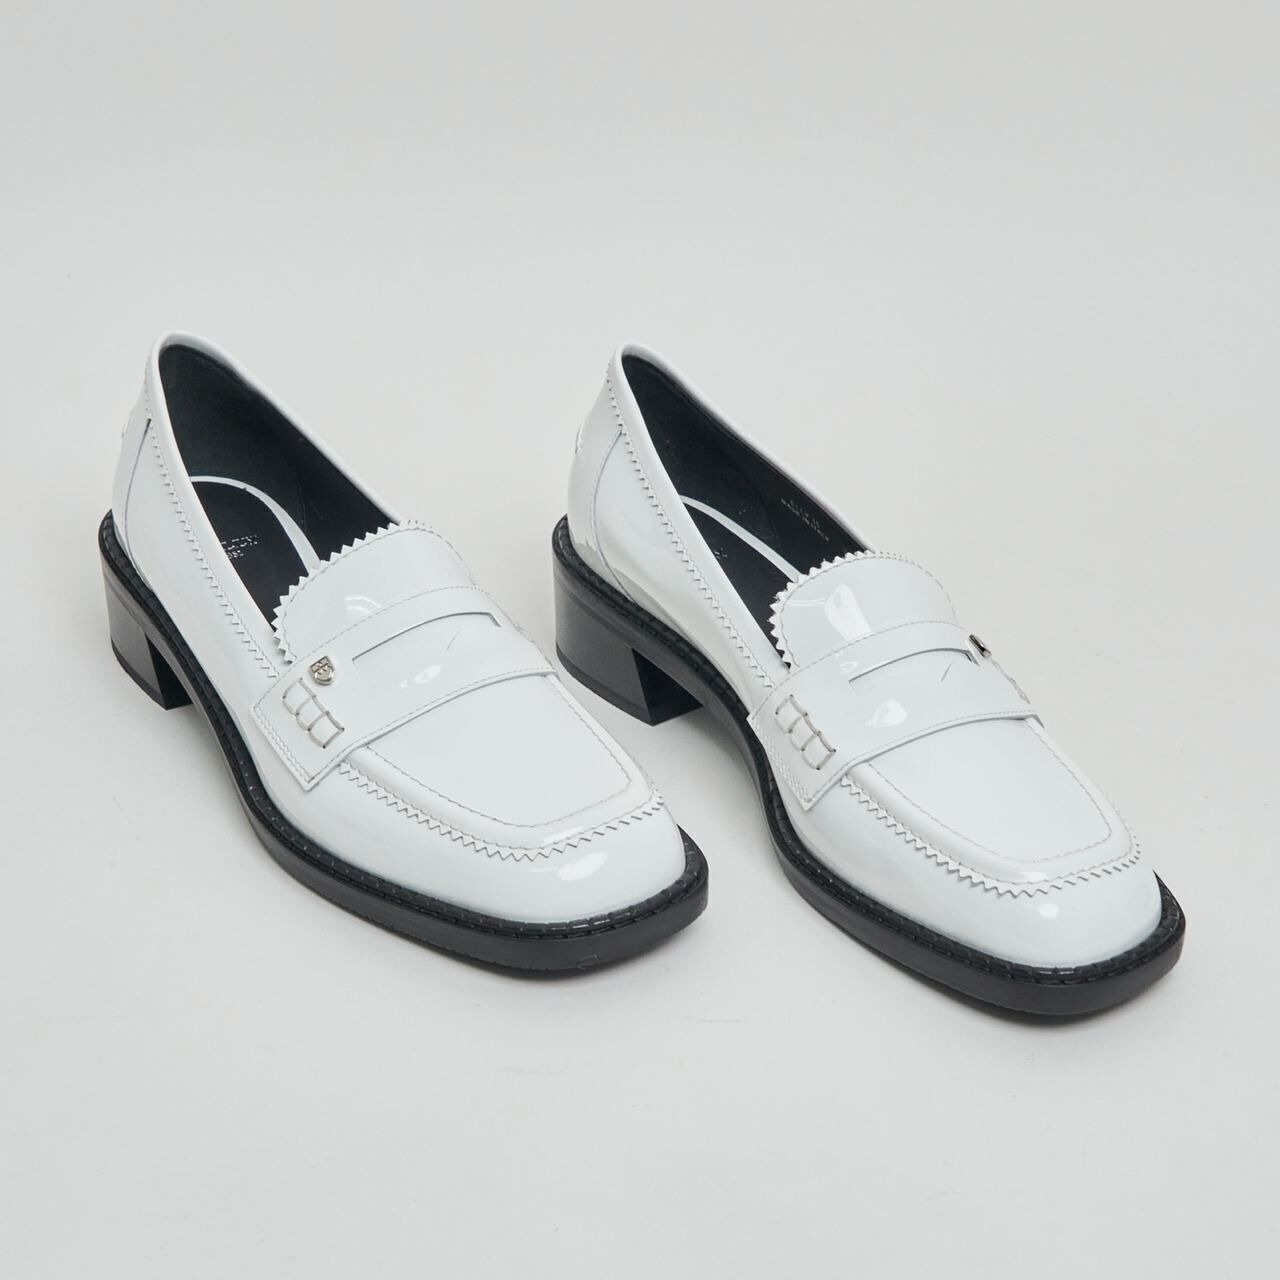 Bally Elly Moccasins Loafers Patent Leather White